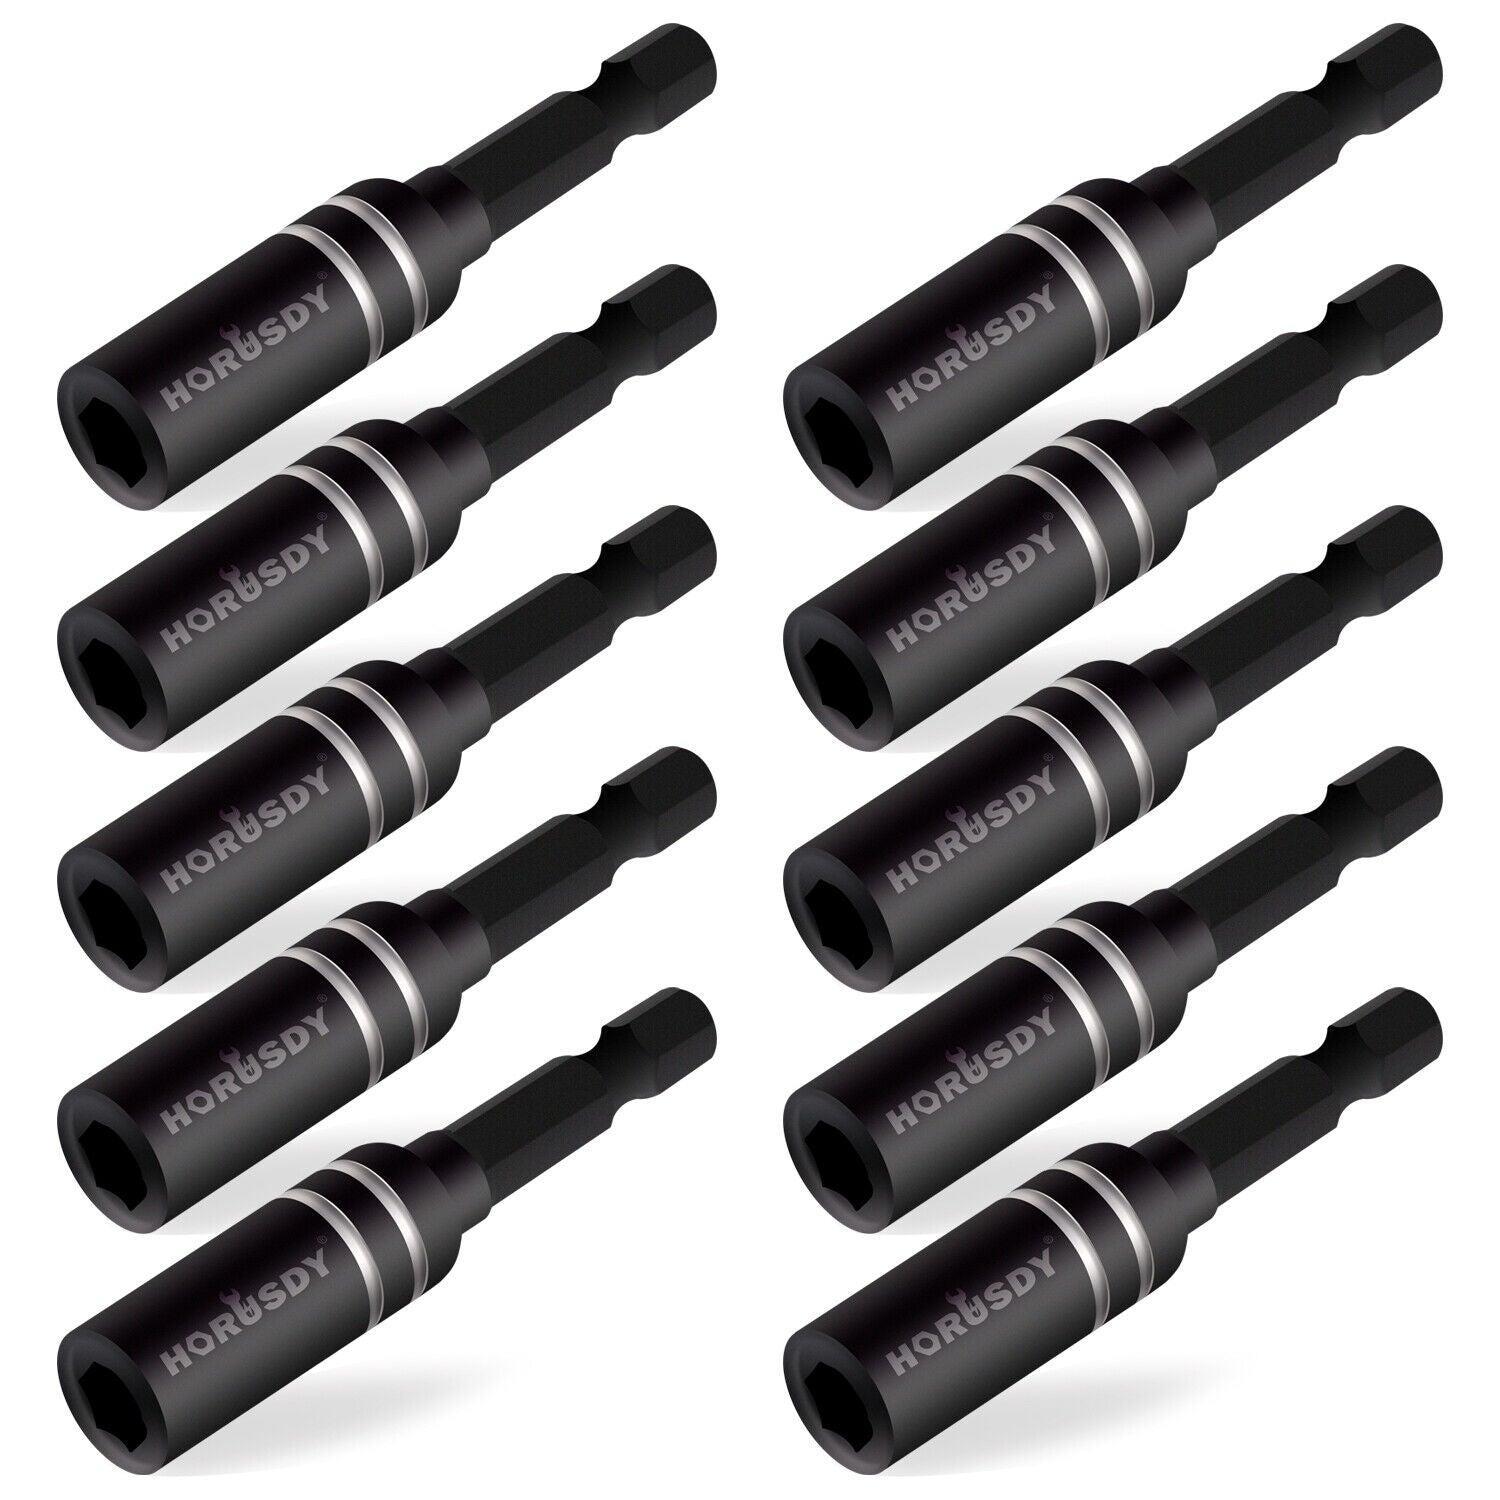 10 Piece Magnetic Screwdriver Extension Drill Bit Holder | Quick Release 1/4 Hex Shank